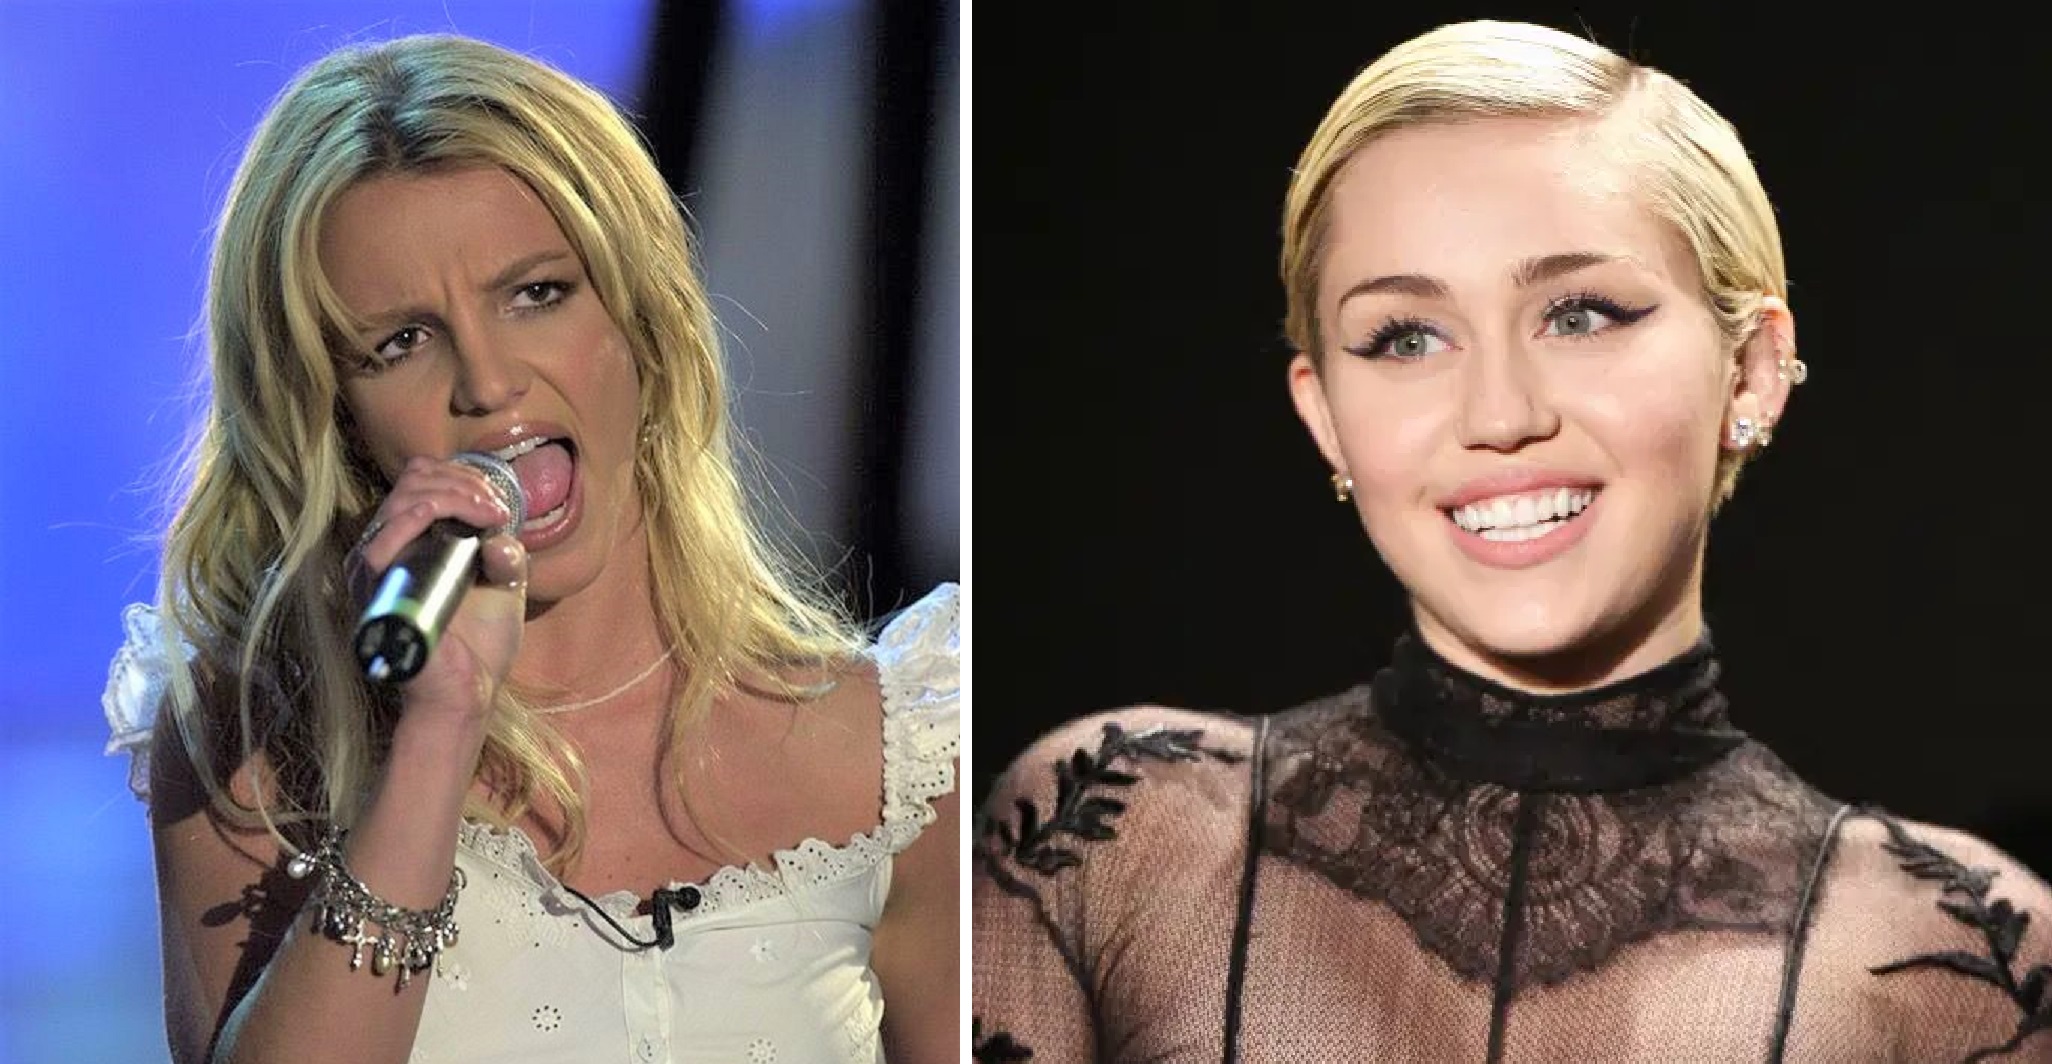 Miley Cyrus Calls Britney Spears ‘Vocal Bible’ After Watching This Viral Singing Video Of Hers